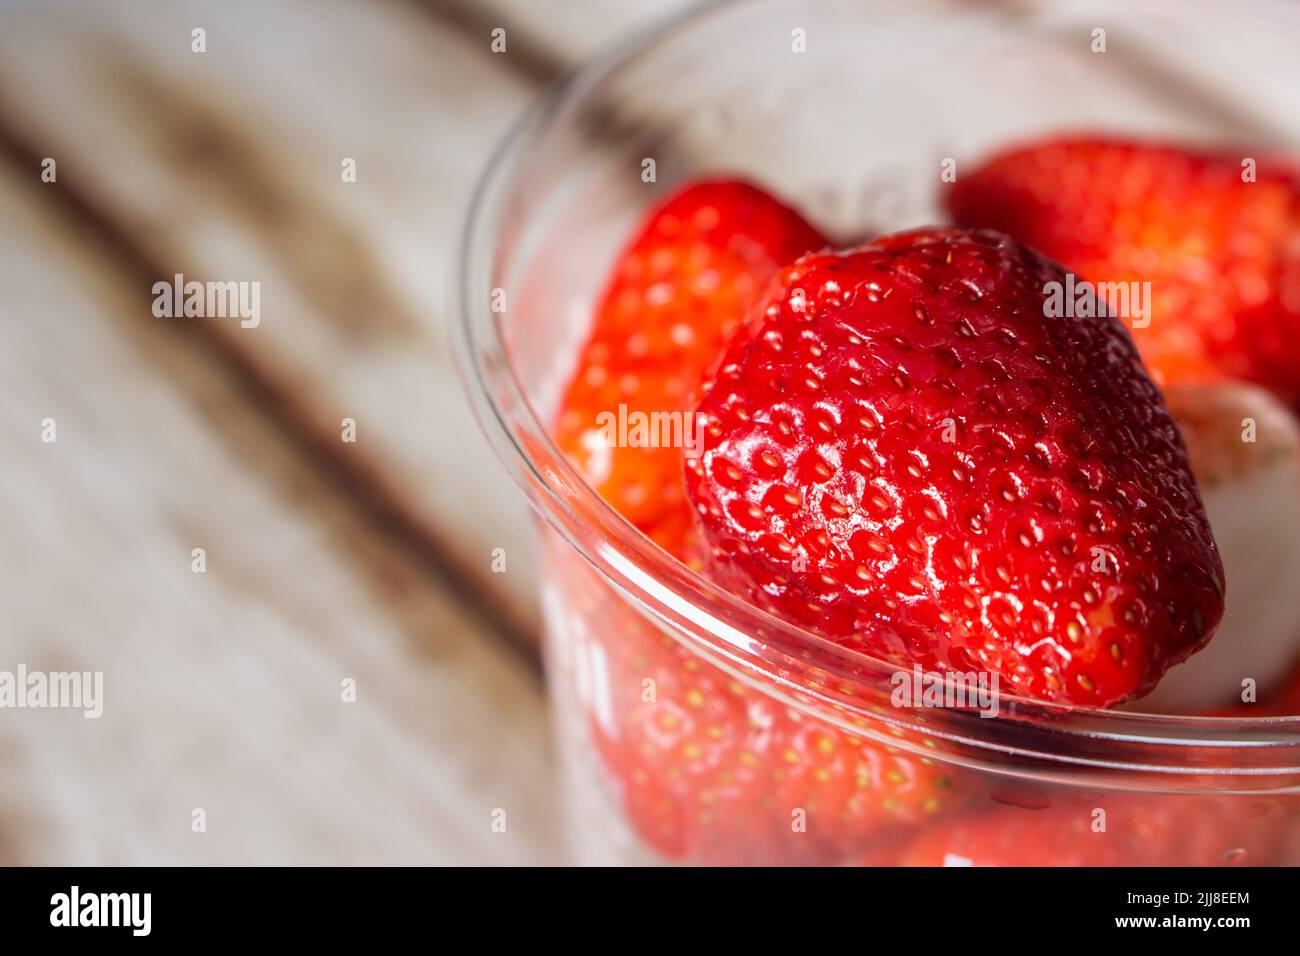 Closeup of strawberries in a plastic cup on a wooden shabby chic table. Stock Photo